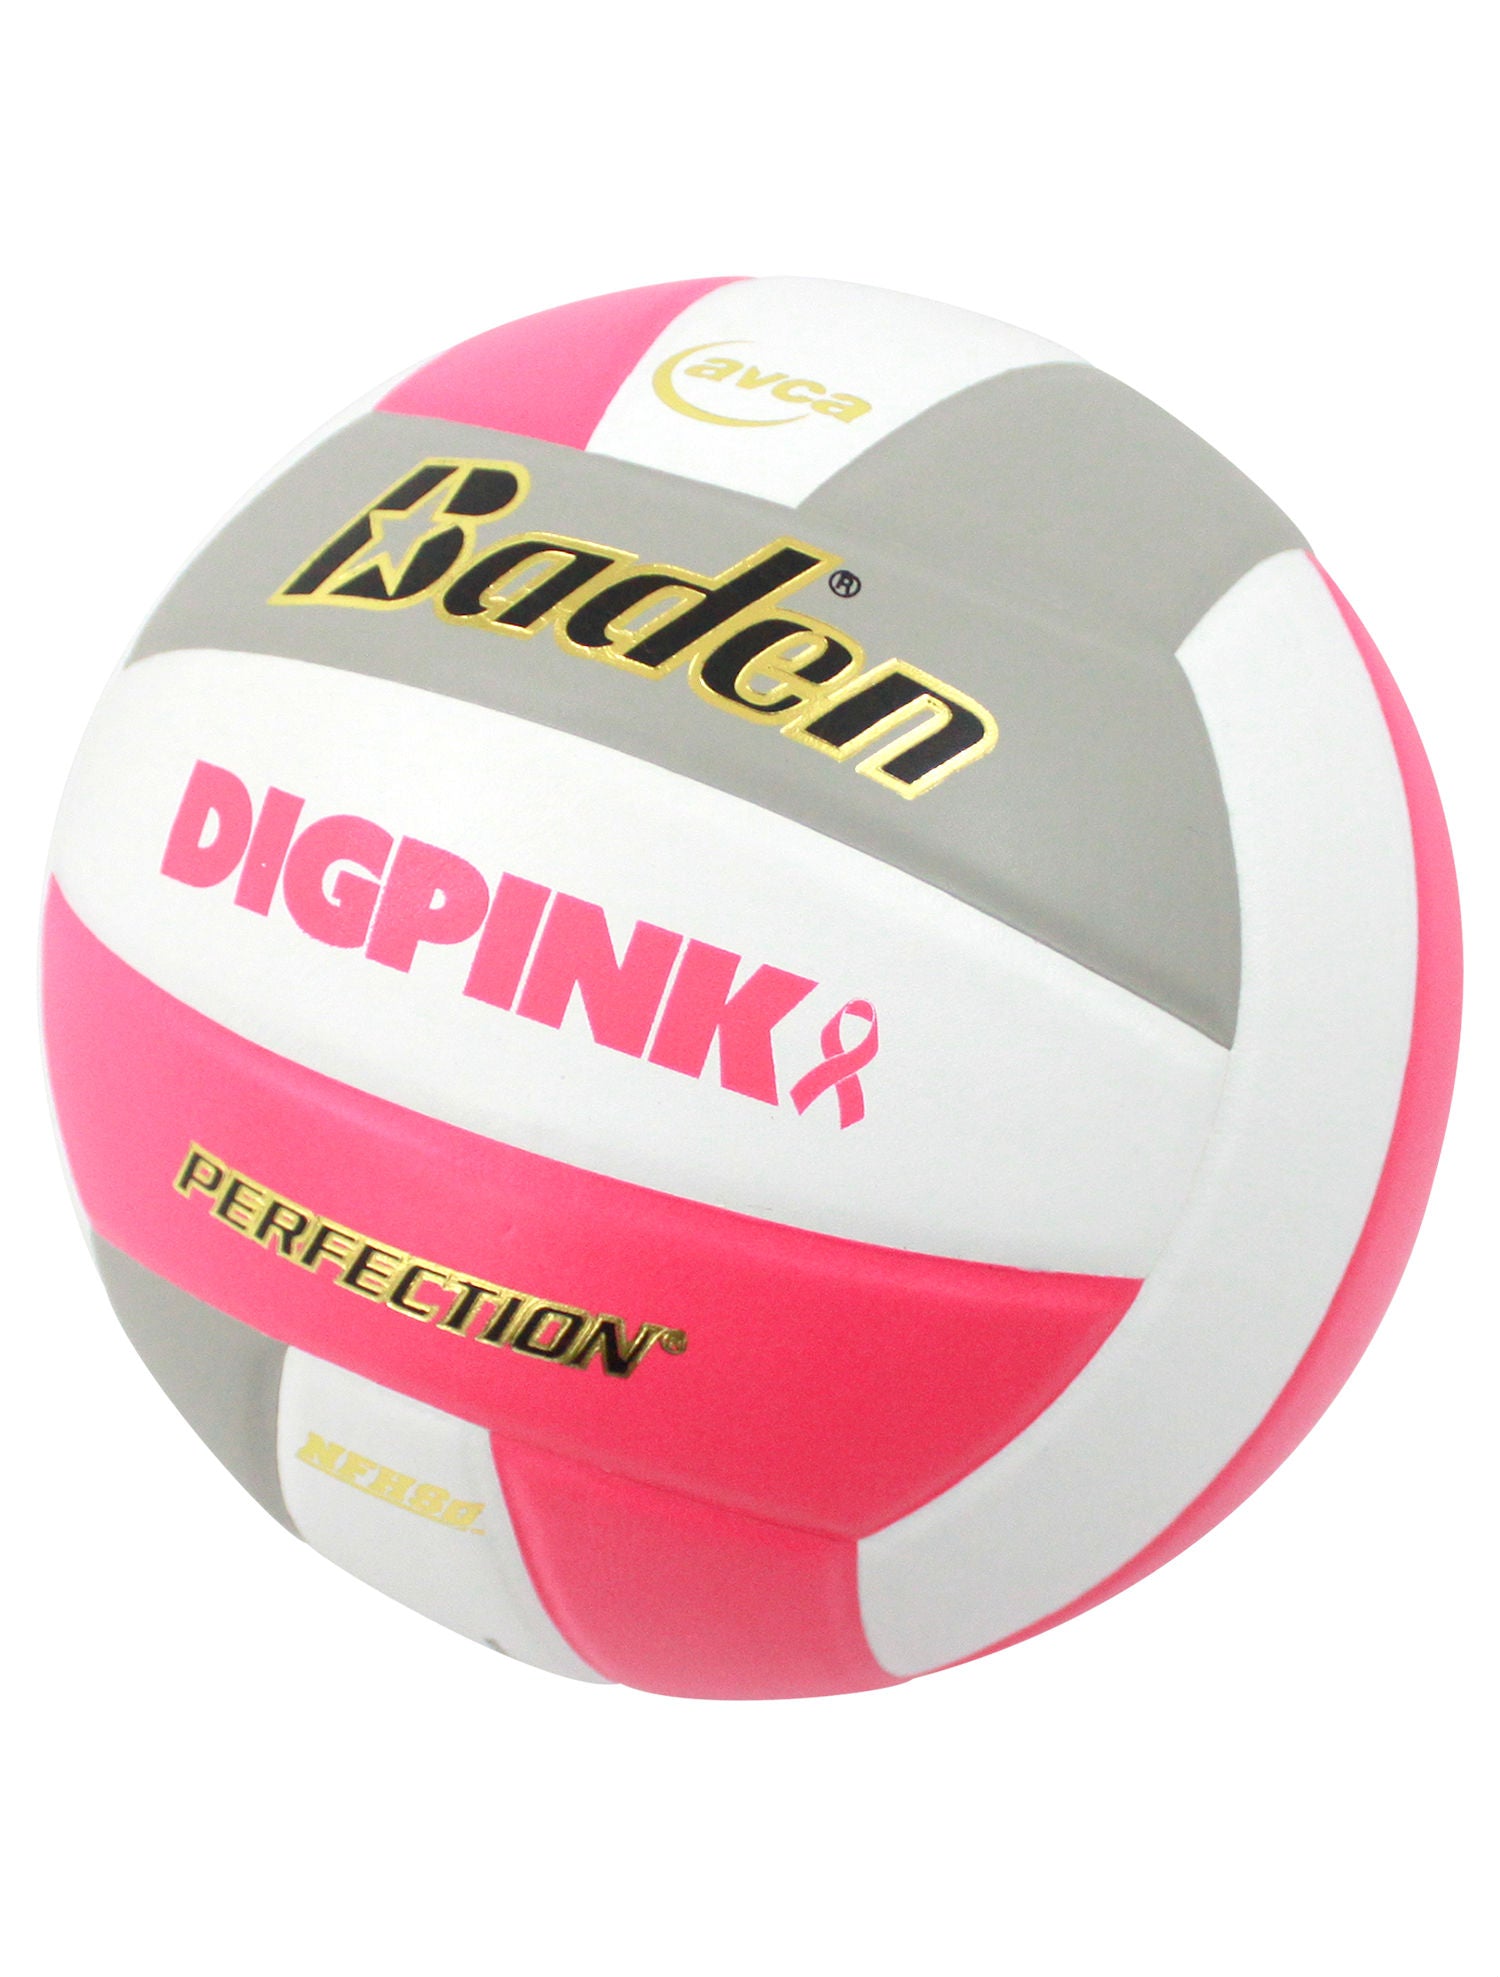 Official Baden Perfection Dig Pink® Leather Volleyball with Logos